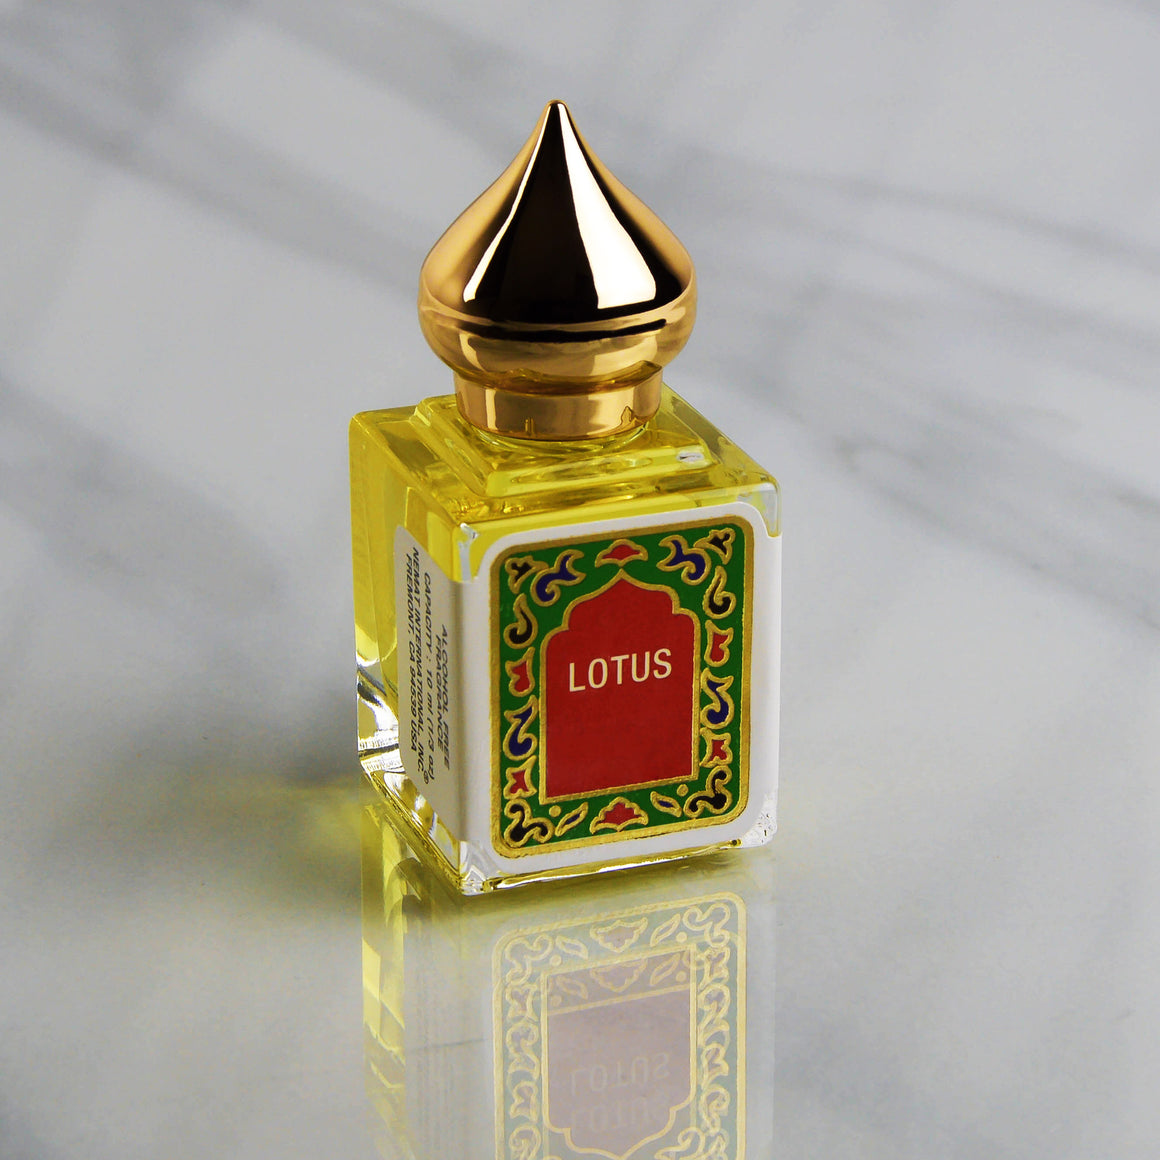 Lotus - exotic perfumes and fragrances by n̩mat